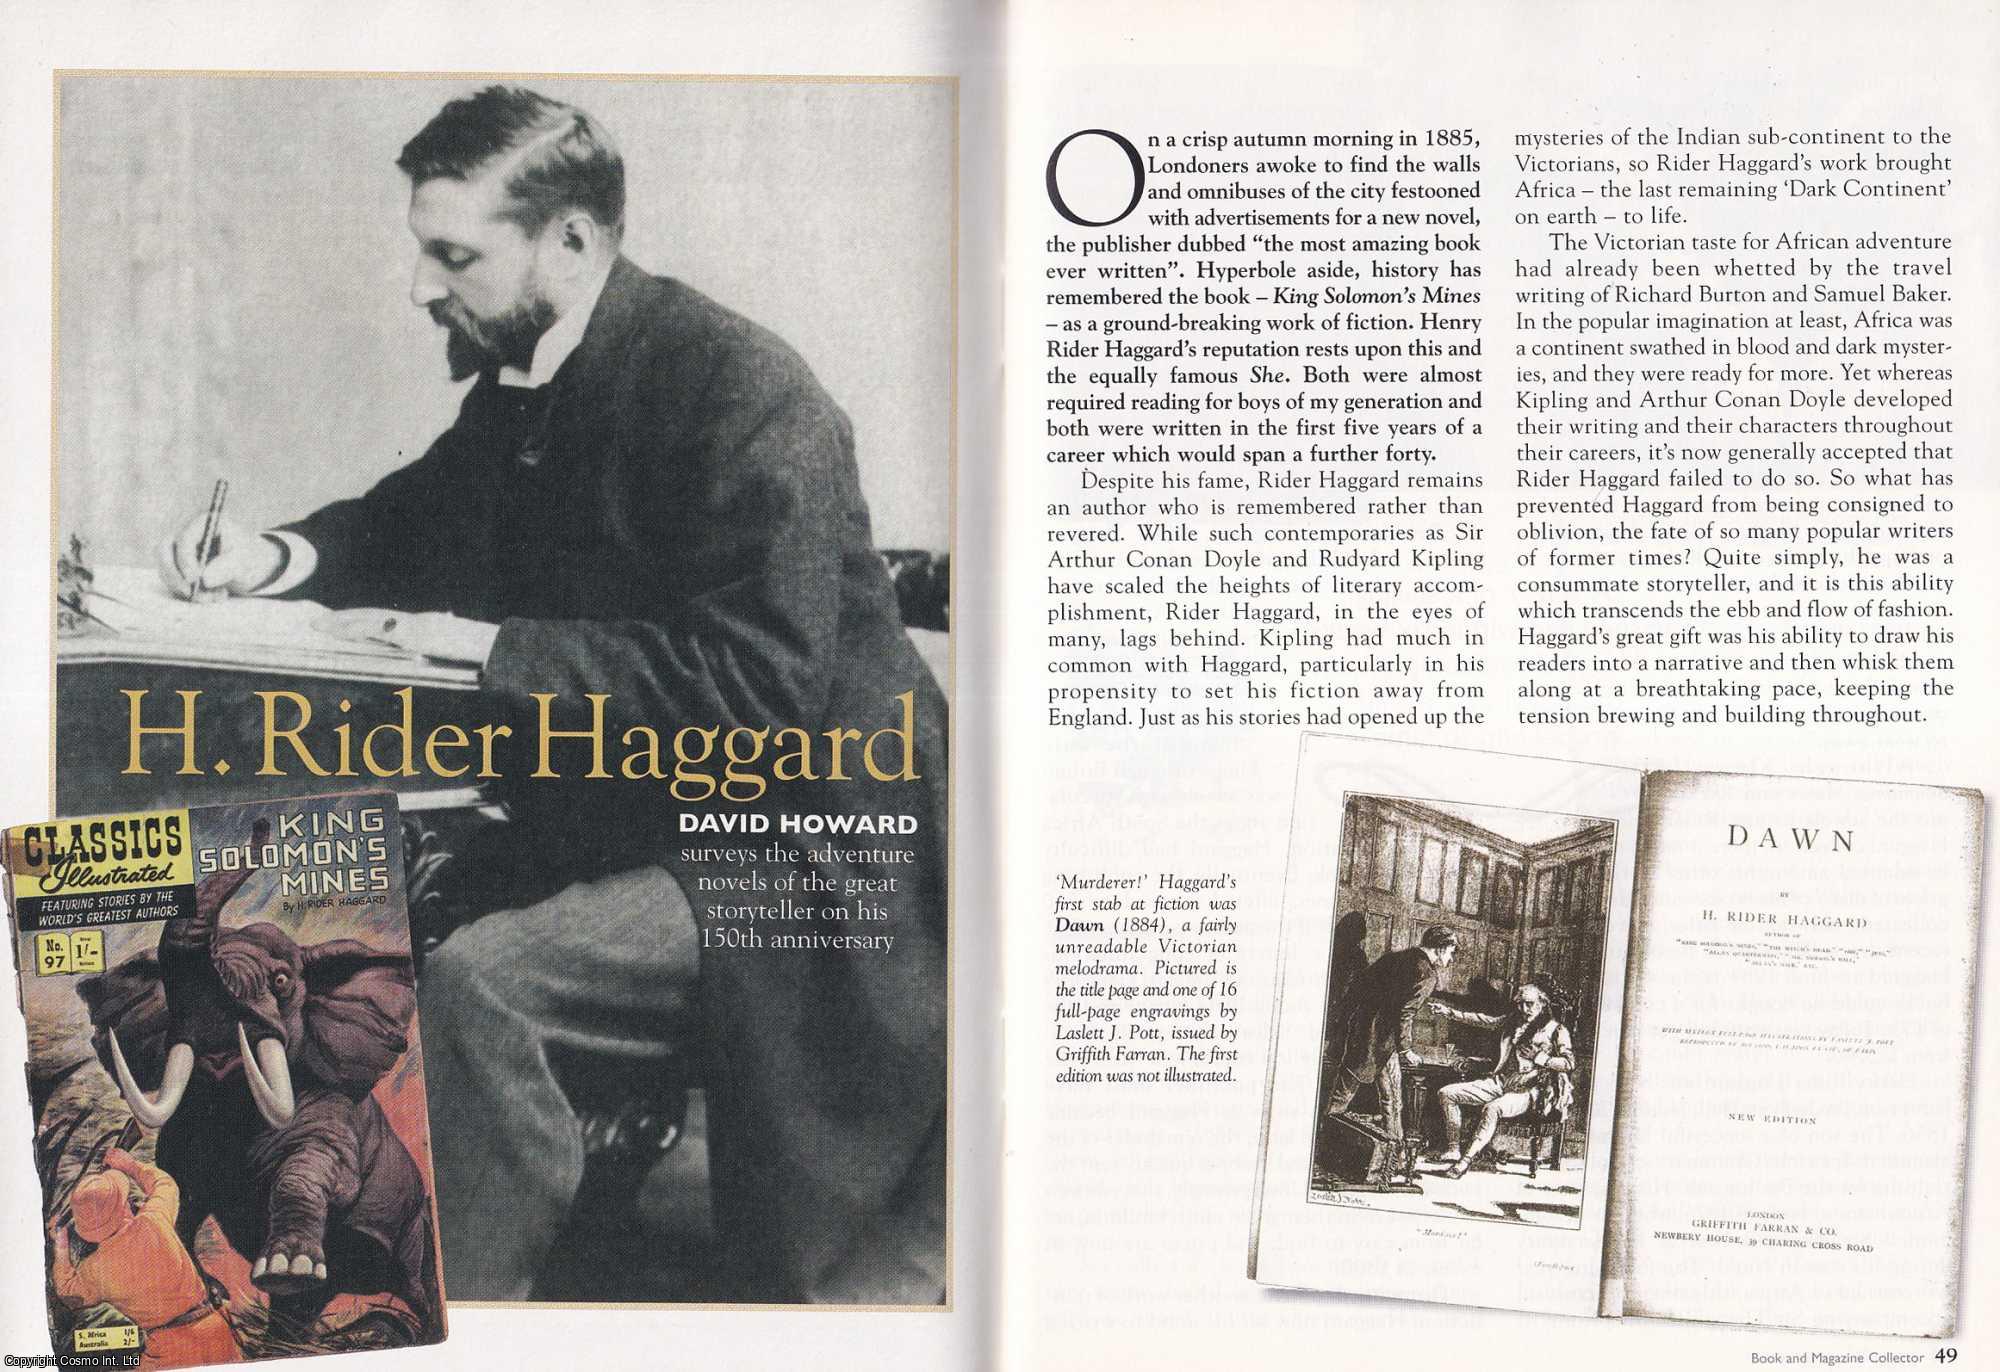 David Howard - H. Rider Haggard. Surveying The Adventure Novels of The Great Storyteller on His 150th Anniversary. This is an original article separated from an issue of The Book & Magazine Collector publication.